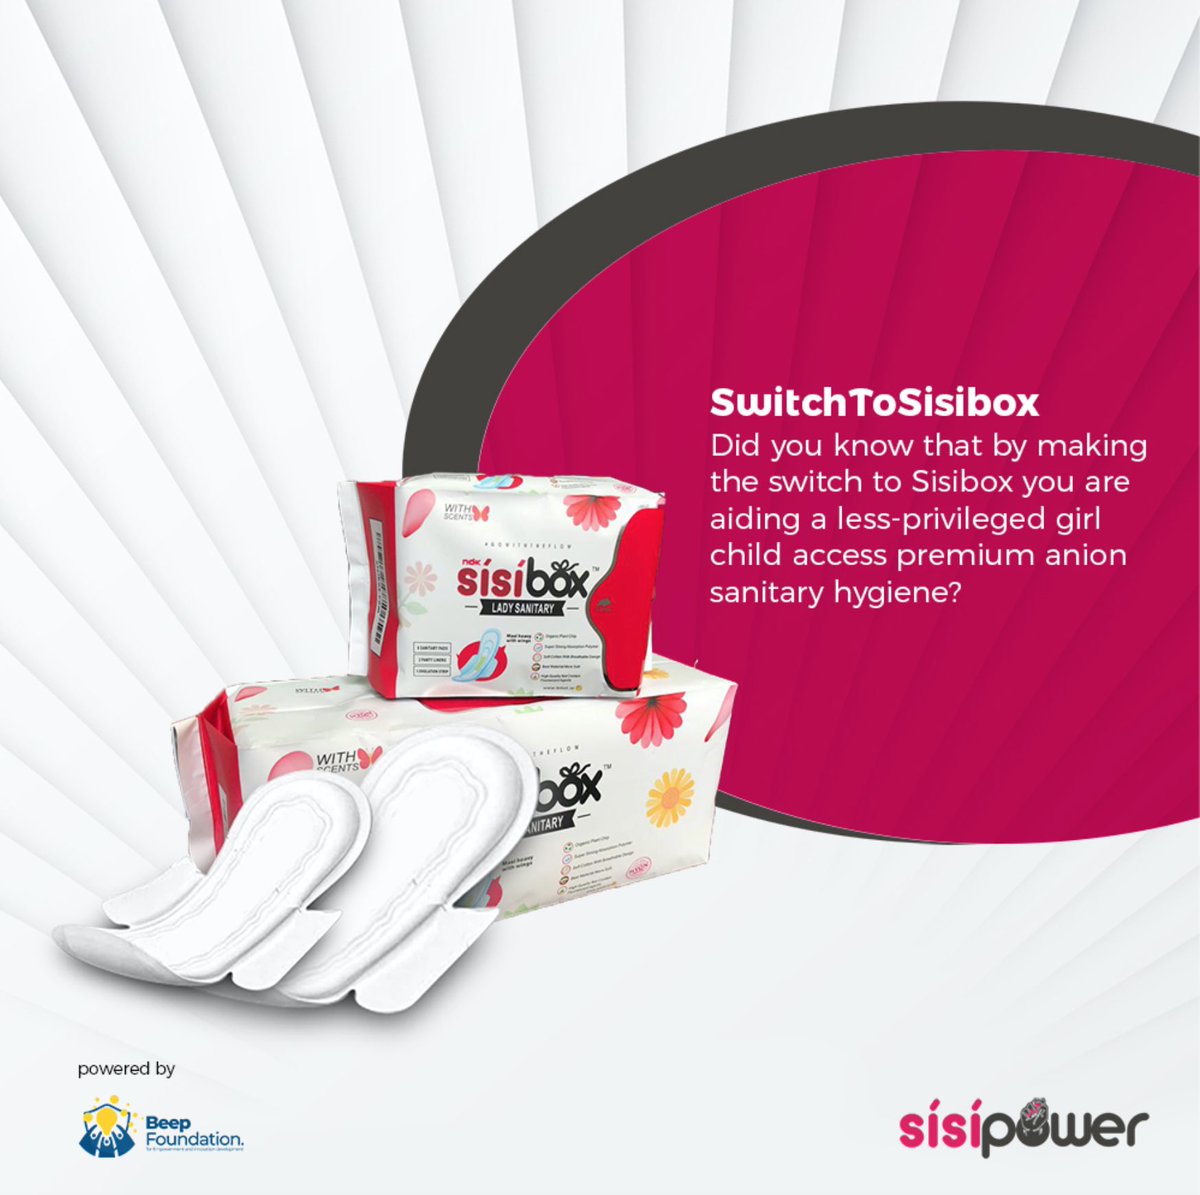 Make the switch to SisiBox this month and your period shall be an 'AUGUST VISITOR' 😉😎 #NoCrampsNoQualms #LifeisABedOfRoses!❤️
.
#sisibox #sanitarypads #anionpads #blockchain